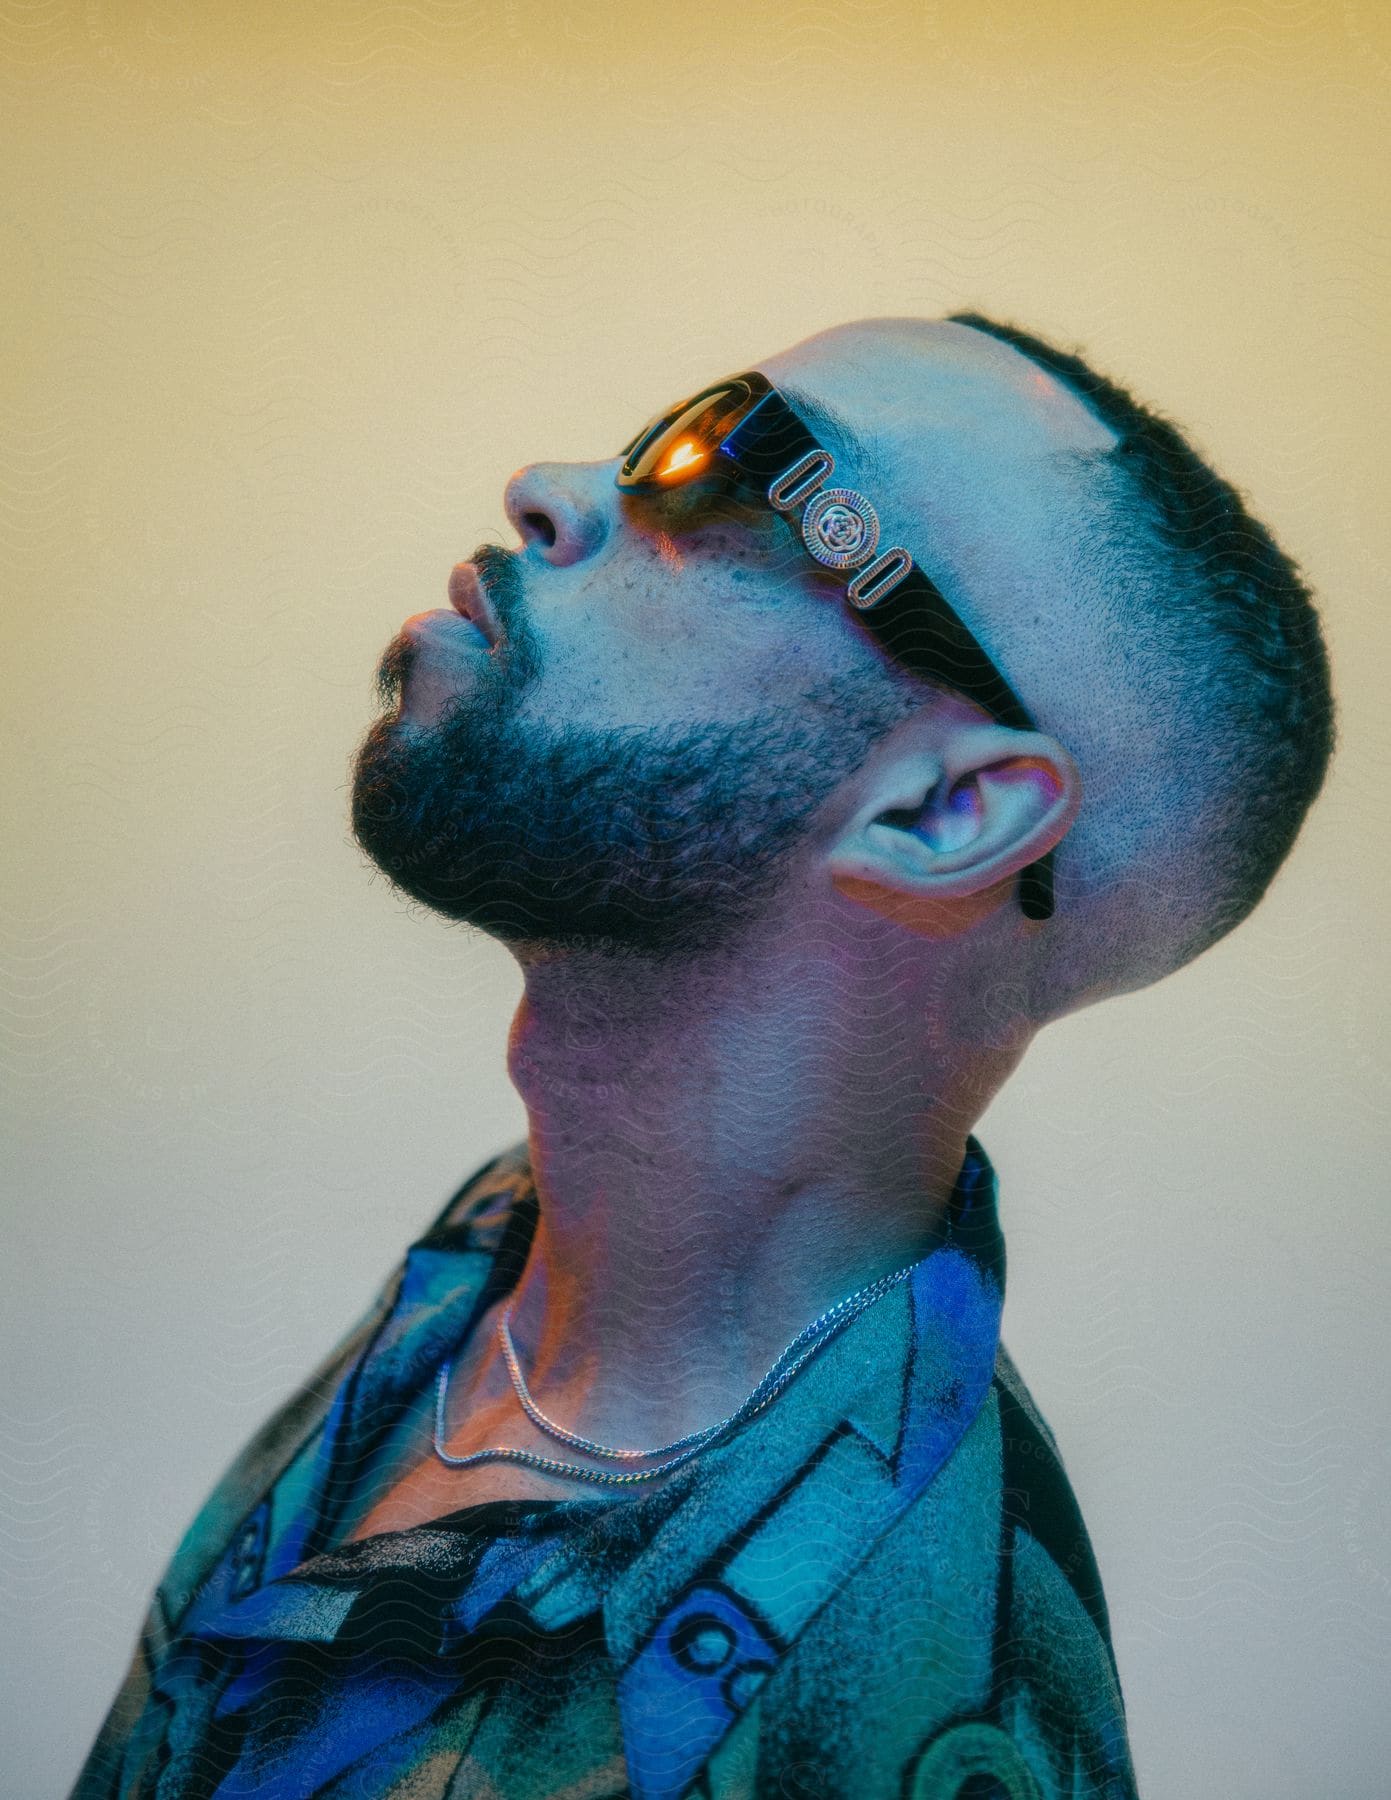 A person with a beard is seen in profile wearing versace sunglasses